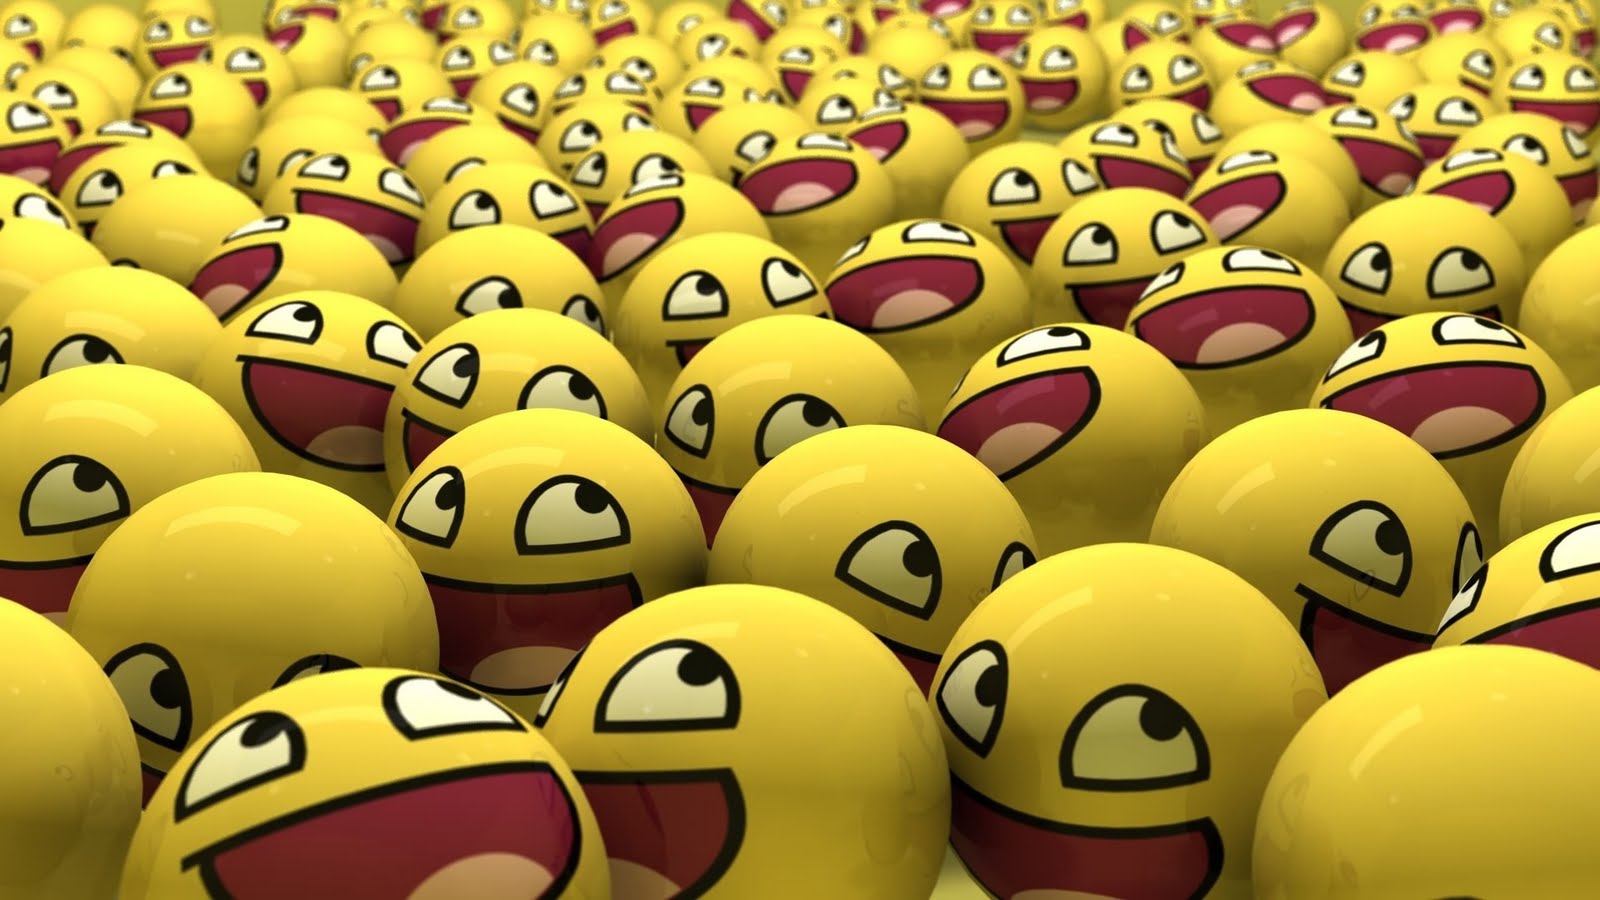 Wallpapers Smiley Face HD Wallpaper